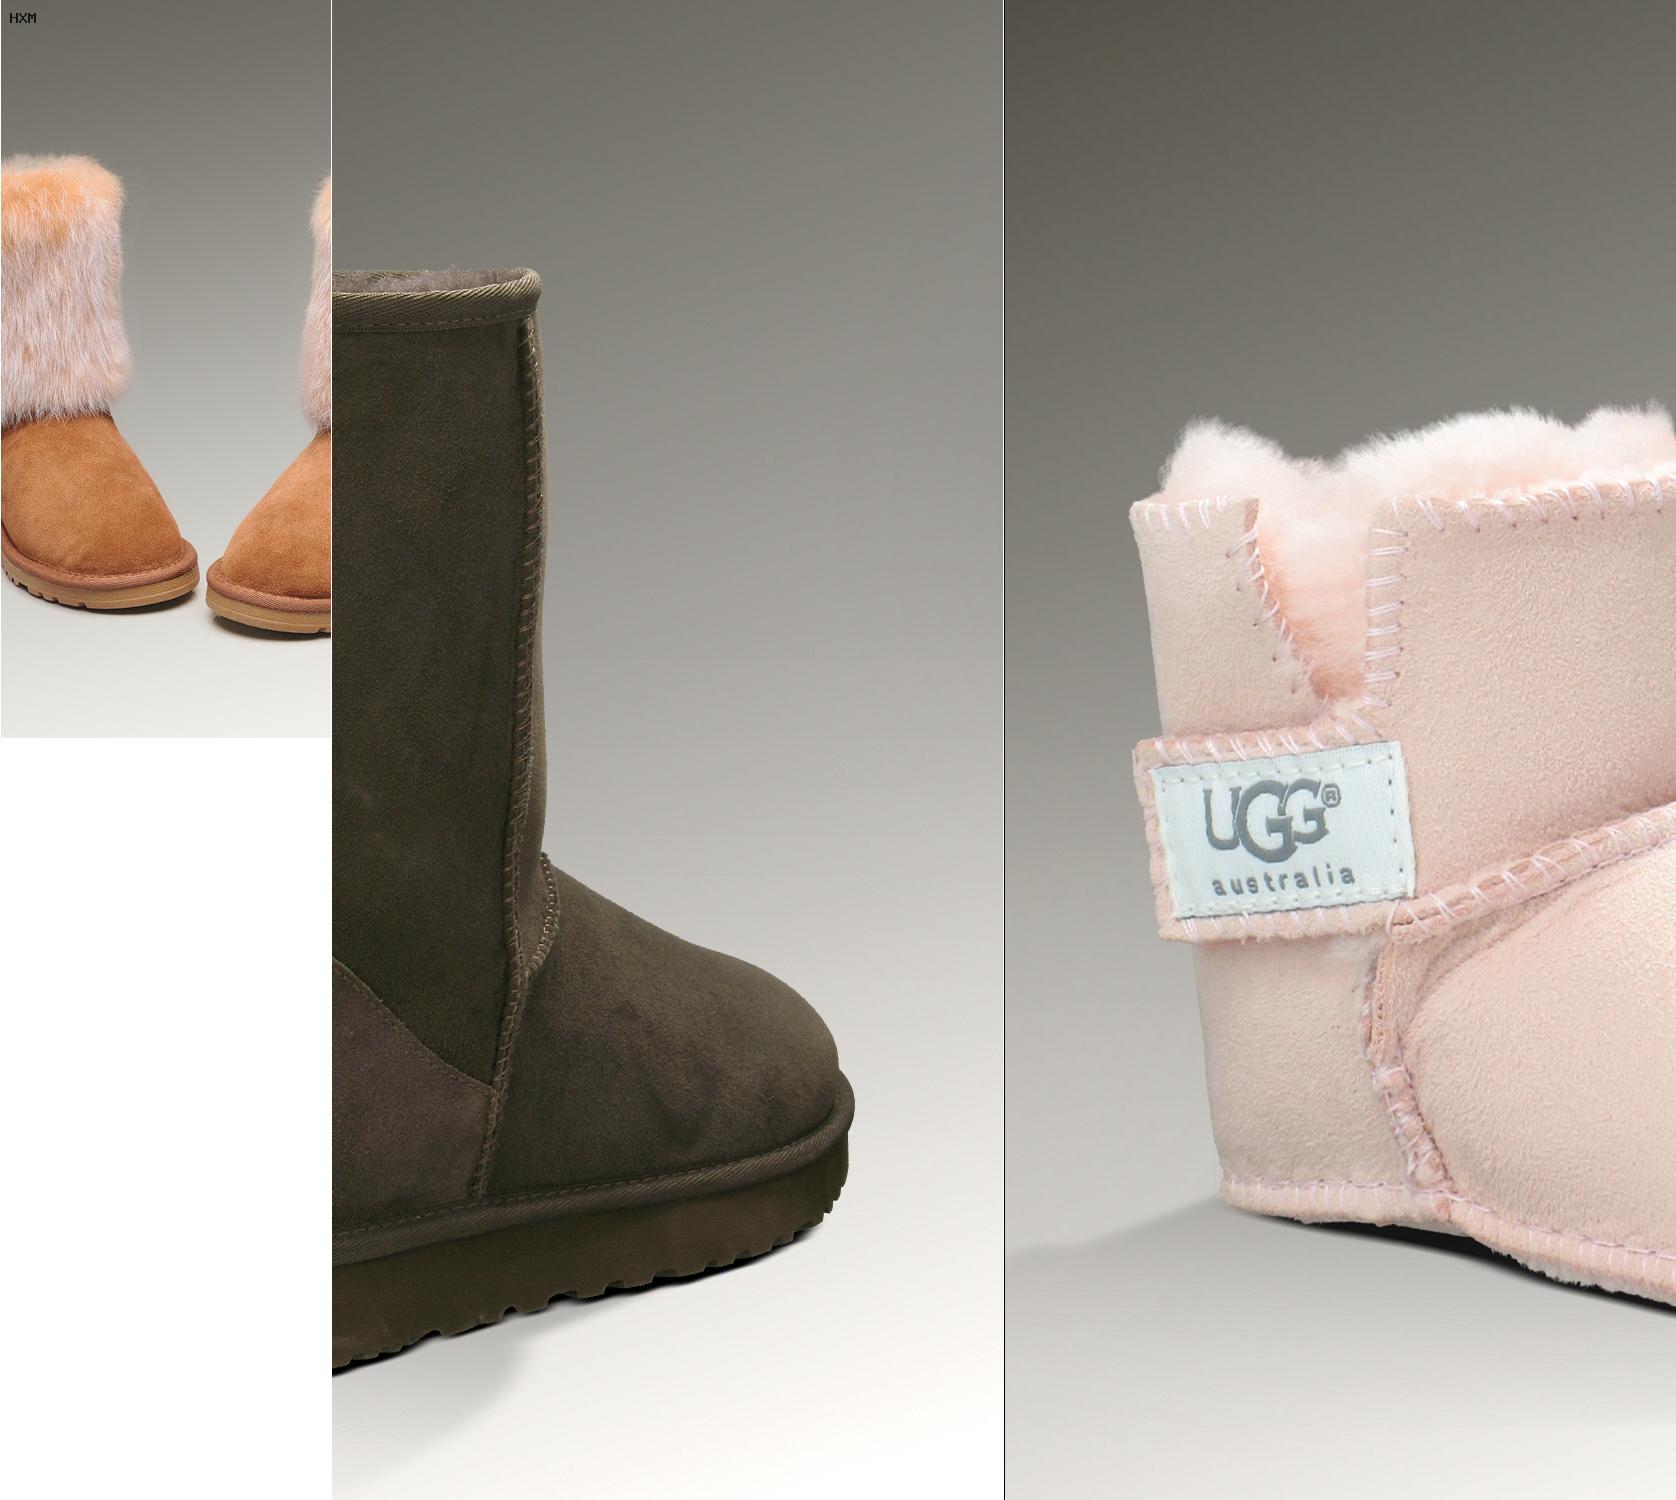 moon boots style ugg